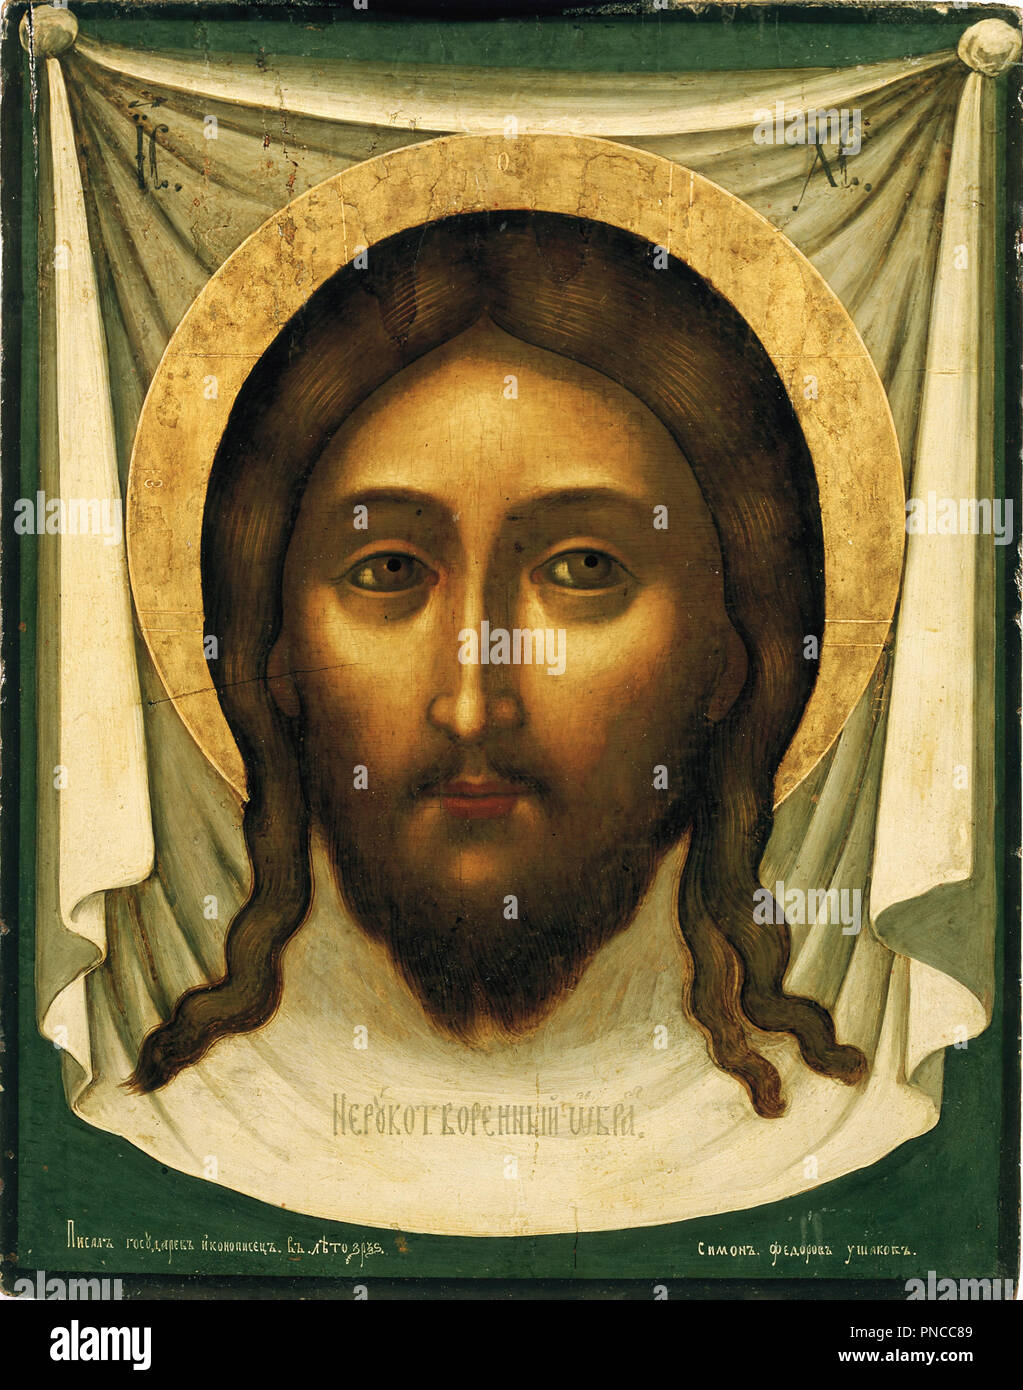 Saviour Made Without Hands. Date/Period: 1658. Painting. Tempera on wood. Height: 53 cm (20.8 in); Width: 42 cm (16.5 in). Author: Simon Ushakov. Ushakov, Simon (Pimen) Fyodorovich. Stock Photo